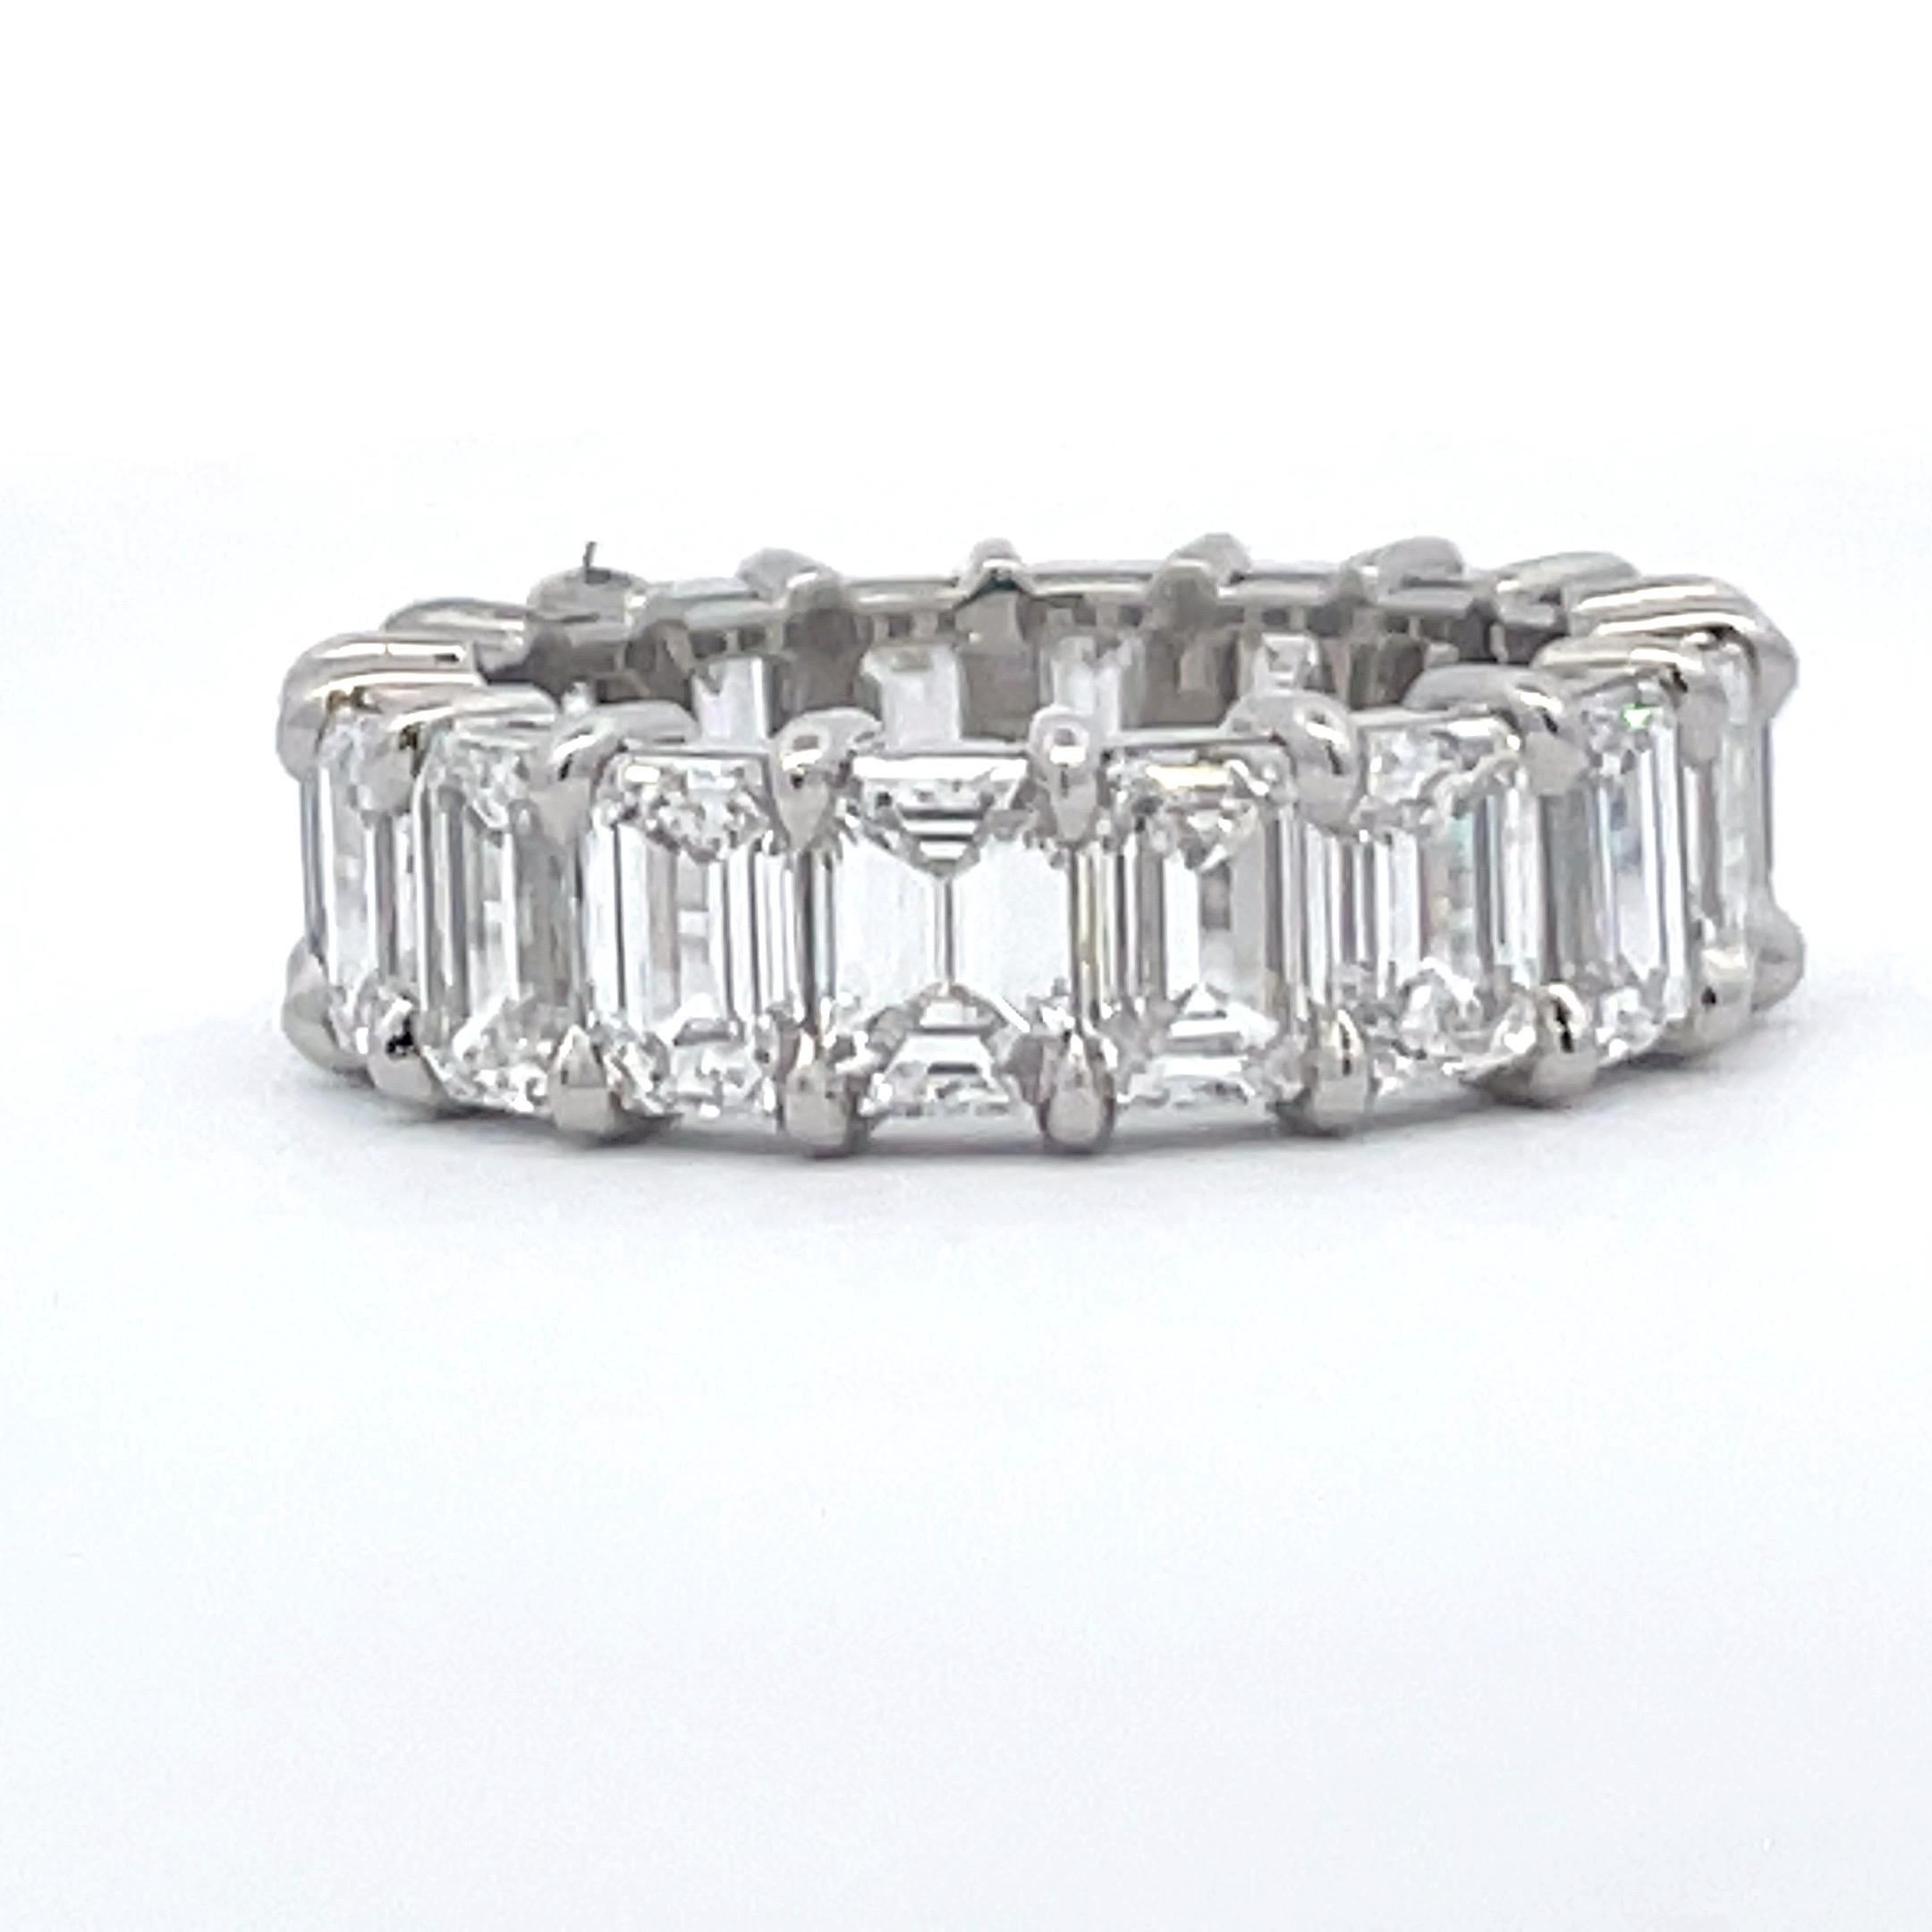 Emerald Cut Diamond Eternity Ring 7.41 CTS F-G VVS2-VS2 Platinum  In New Condition For Sale In New York, NY